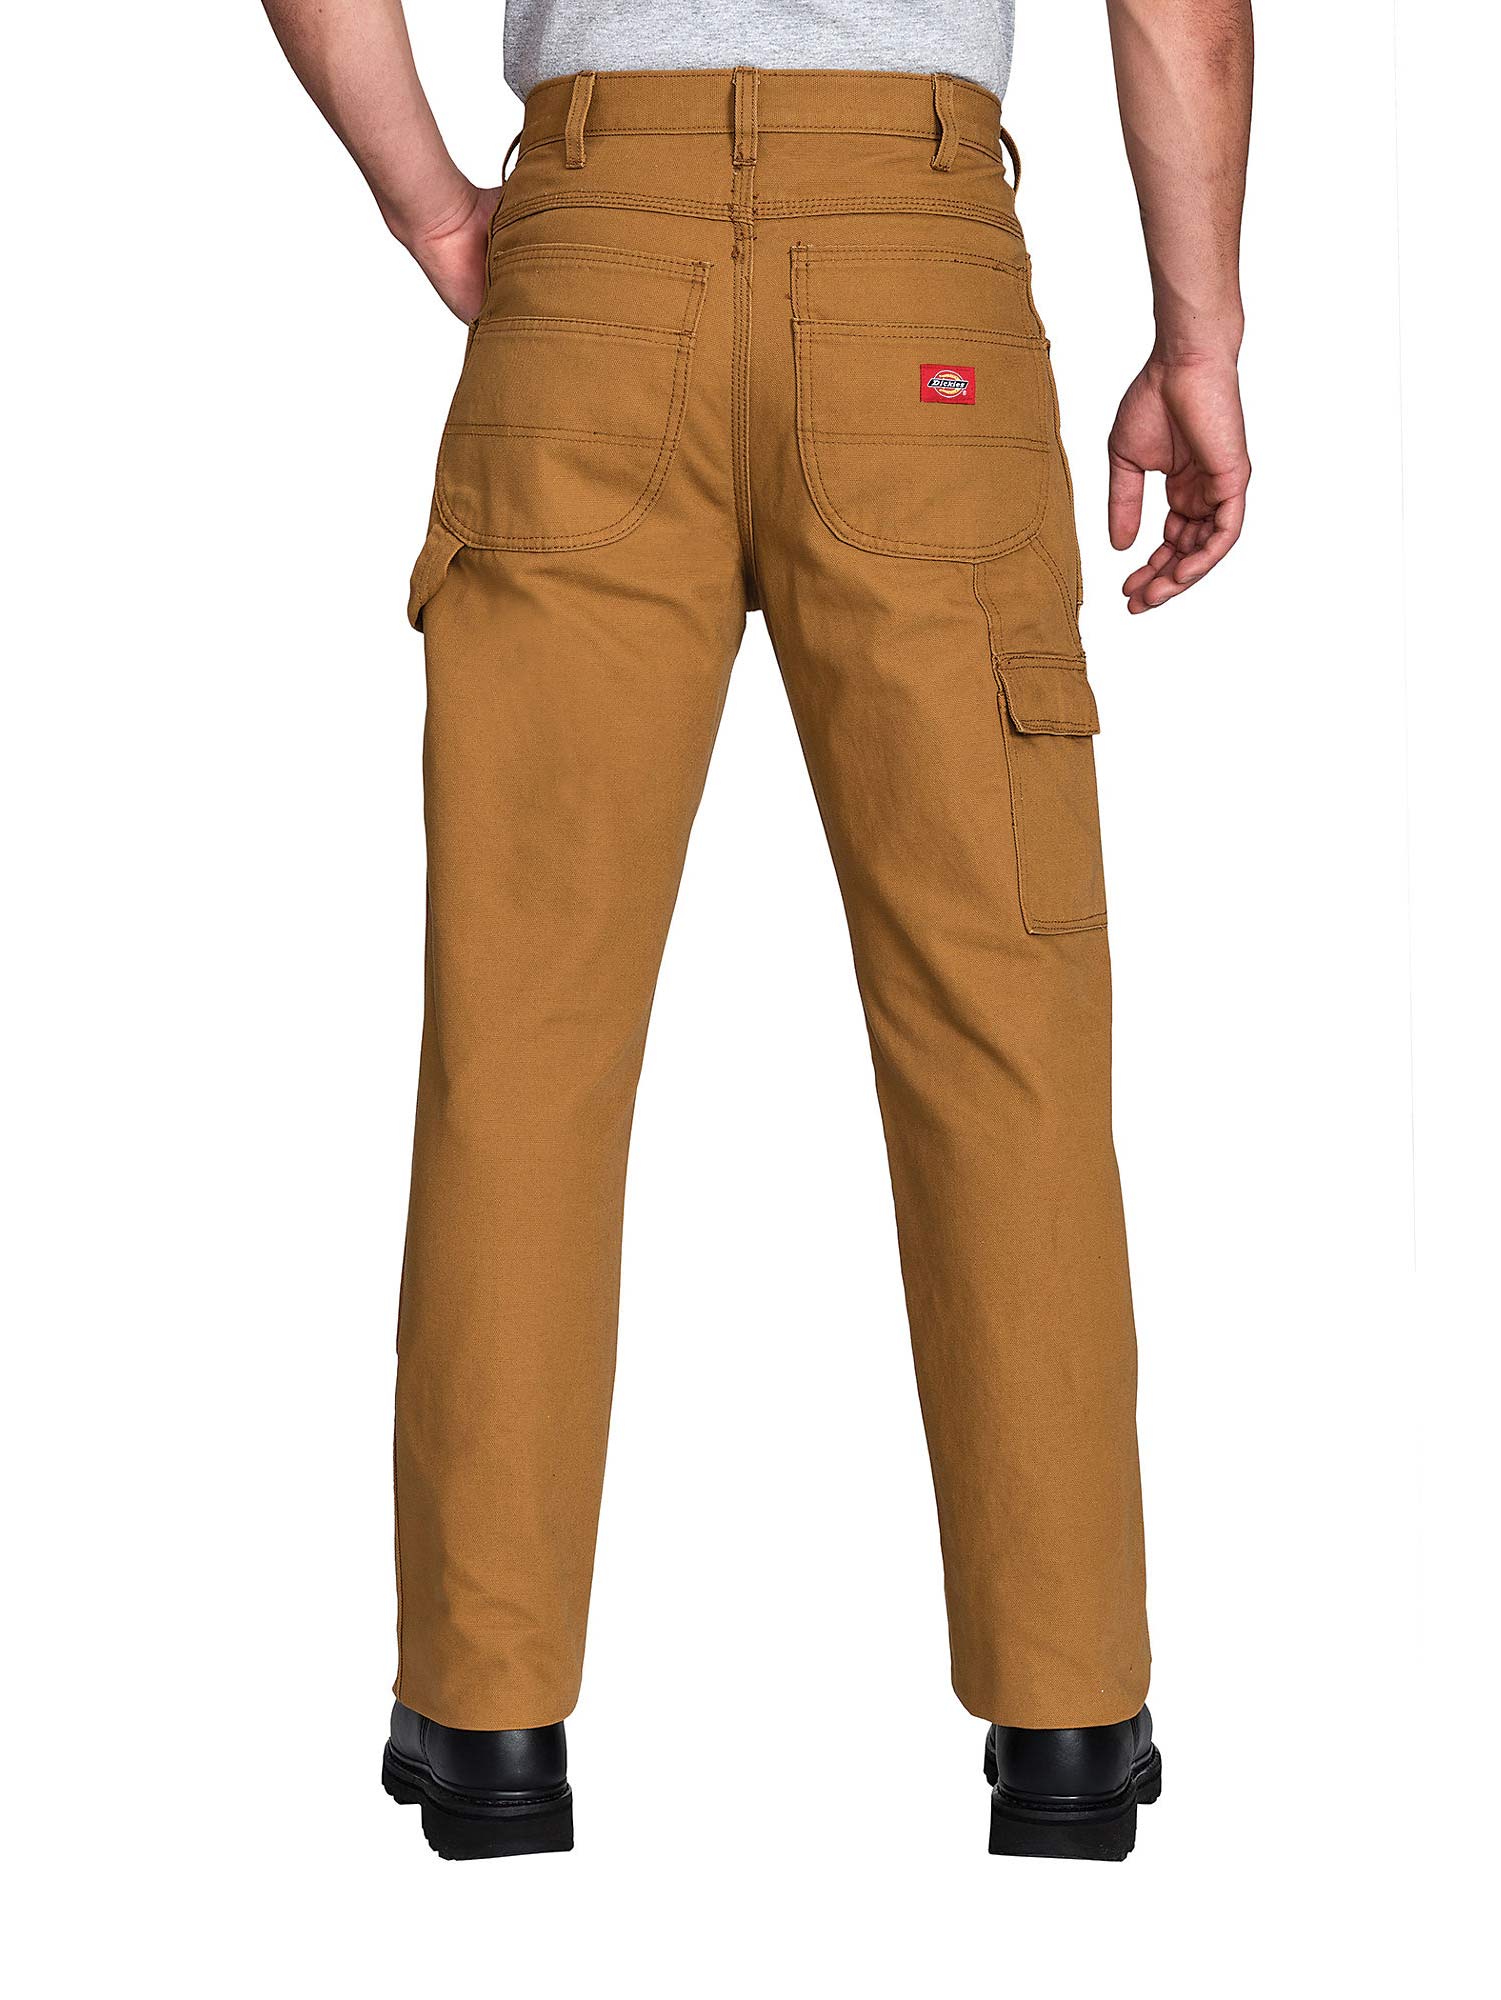 Dickies Relaxed Fit Duck Logger Pant - 19393